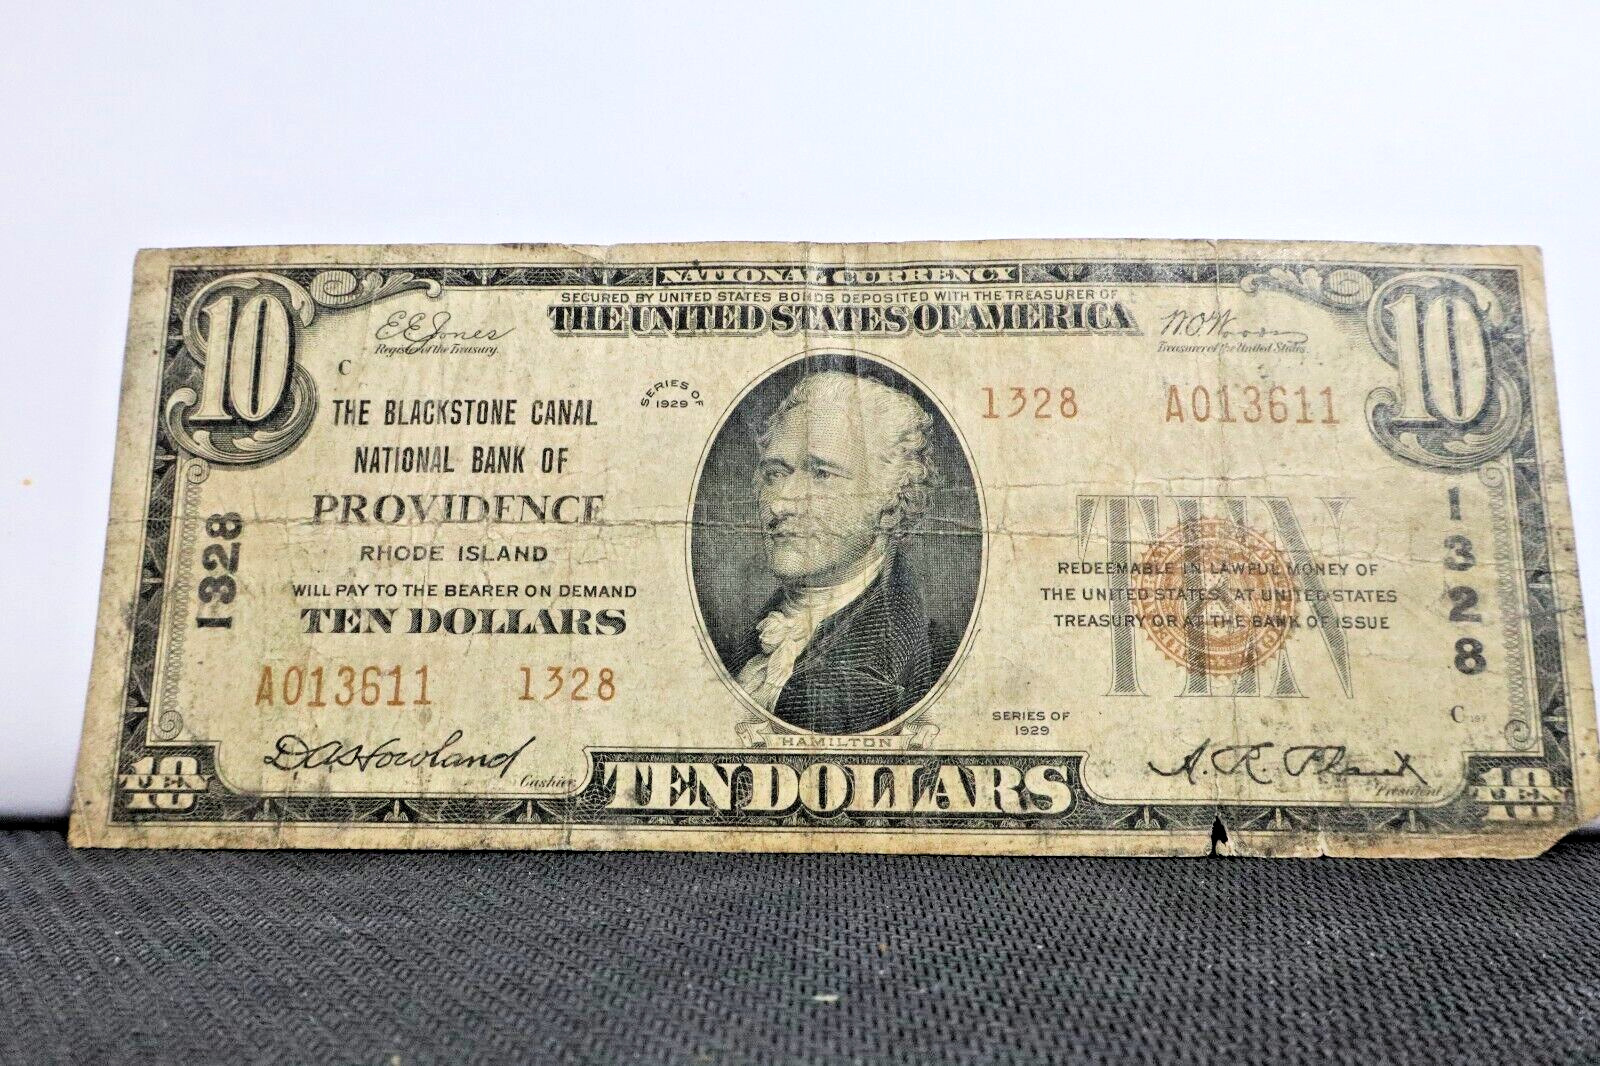 1929 $10 The Blackstone Canal National Bank of Providence, Rhode Island